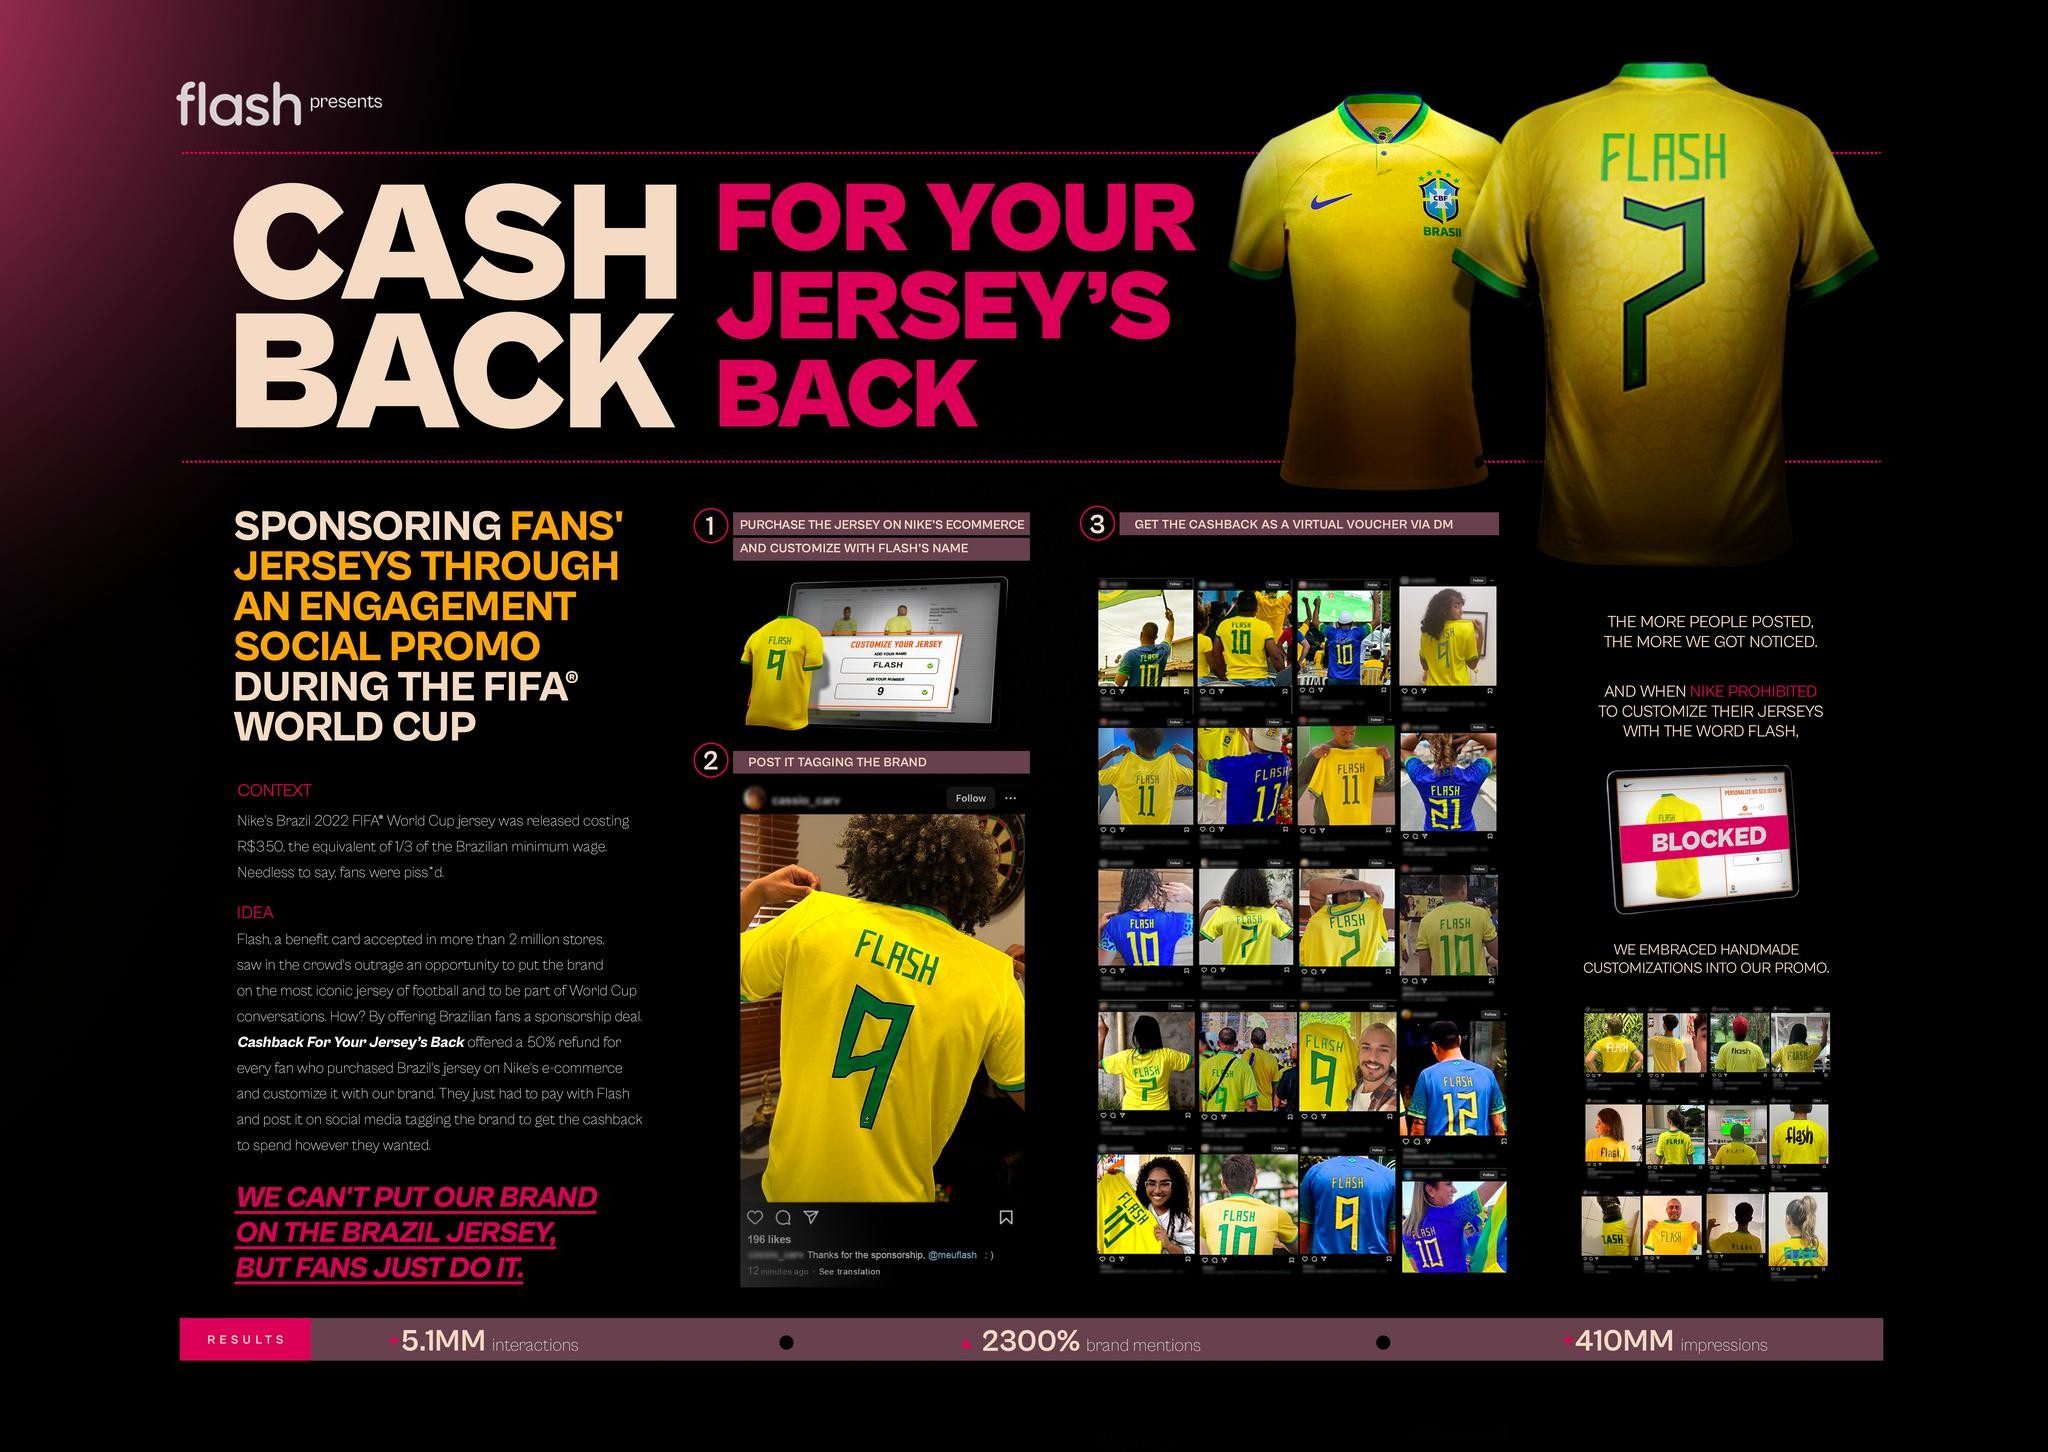 CASHBACK FOR YOUR JERSEY’S BACK